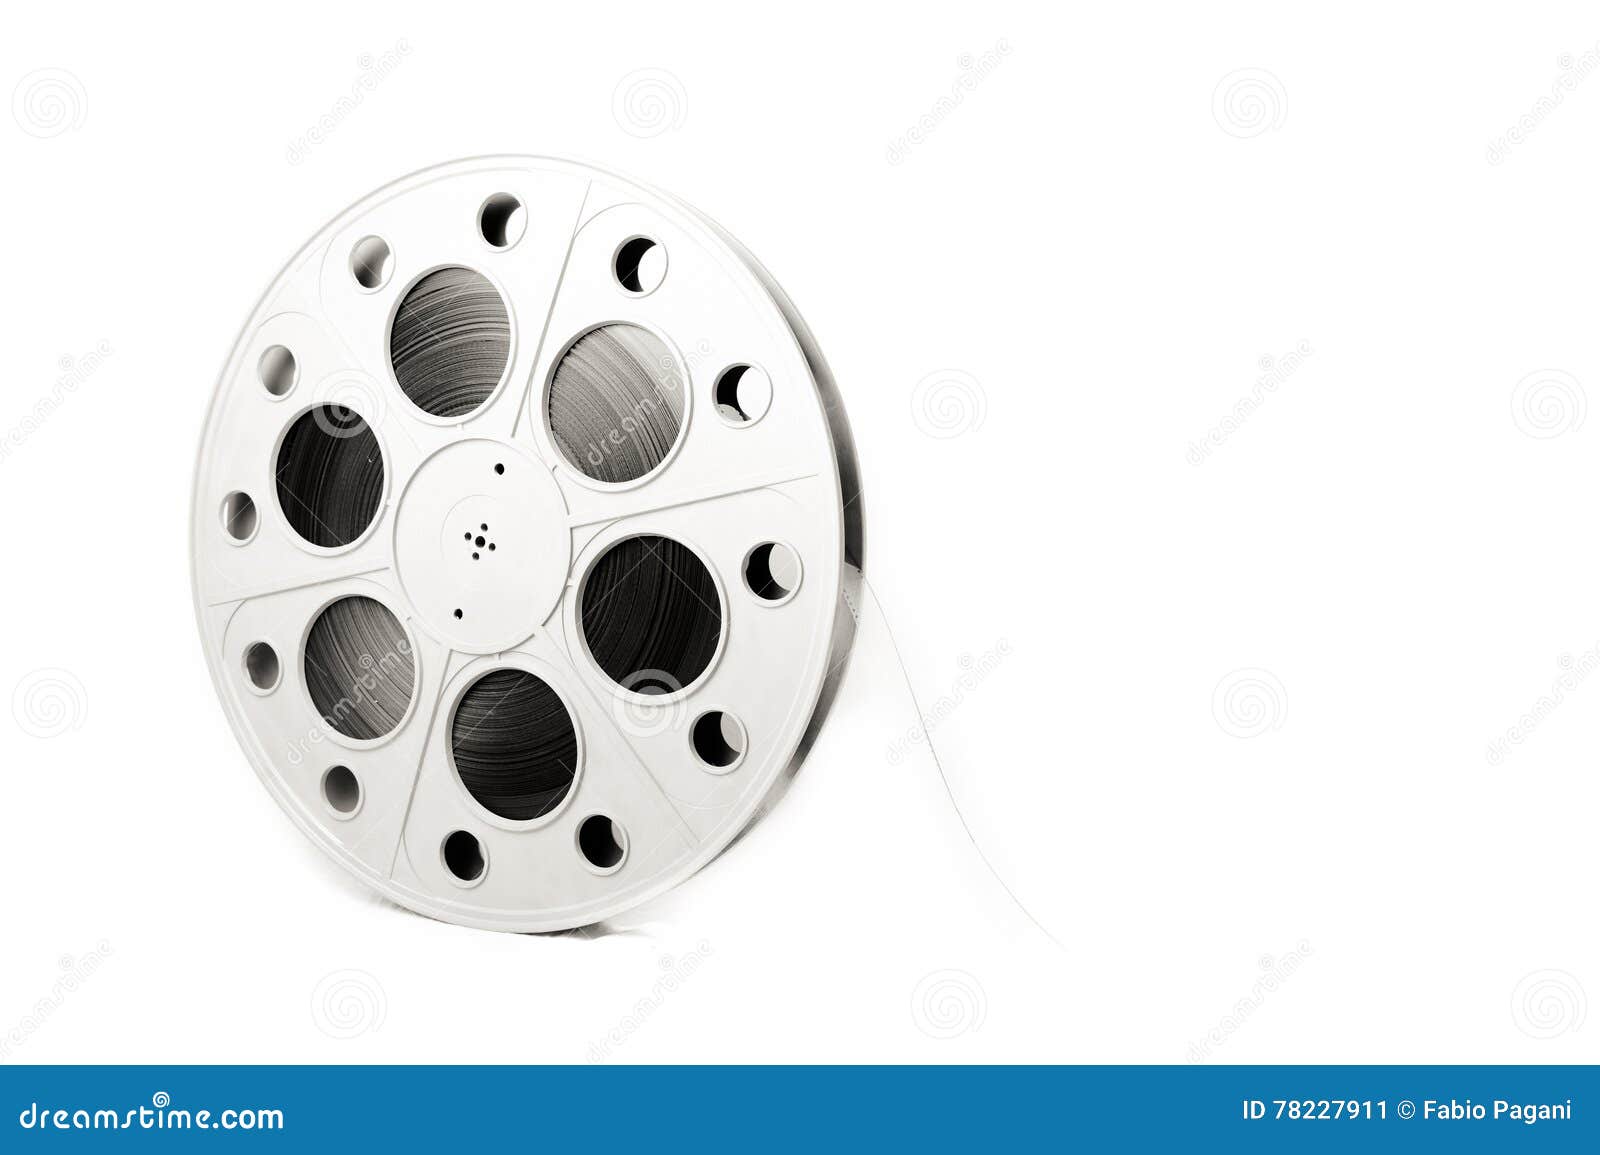 https://thumbs.dreamstime.com/z/mm-cinema-vintage-big-movie-reel-isolated-projector-film-black-white-copy-space-right-78227911.jpg